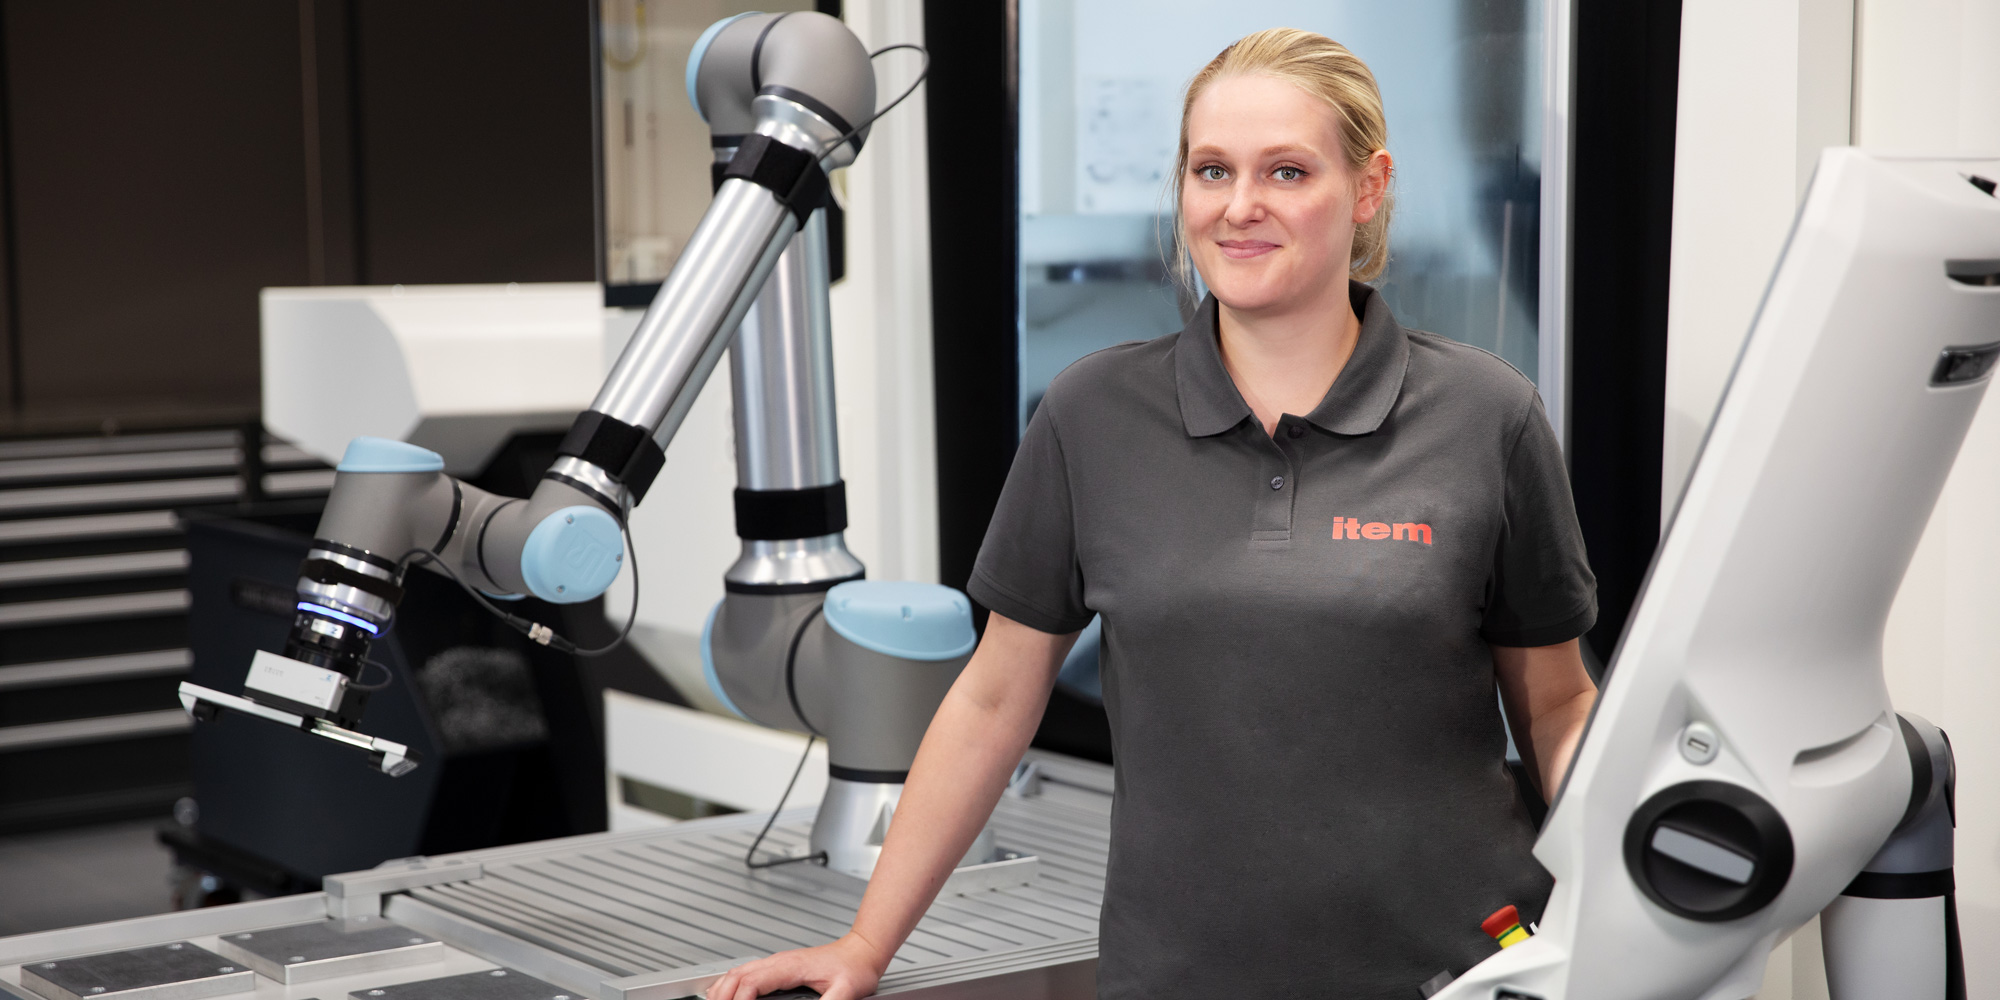 Robotics in industry – seamless and flexible integration